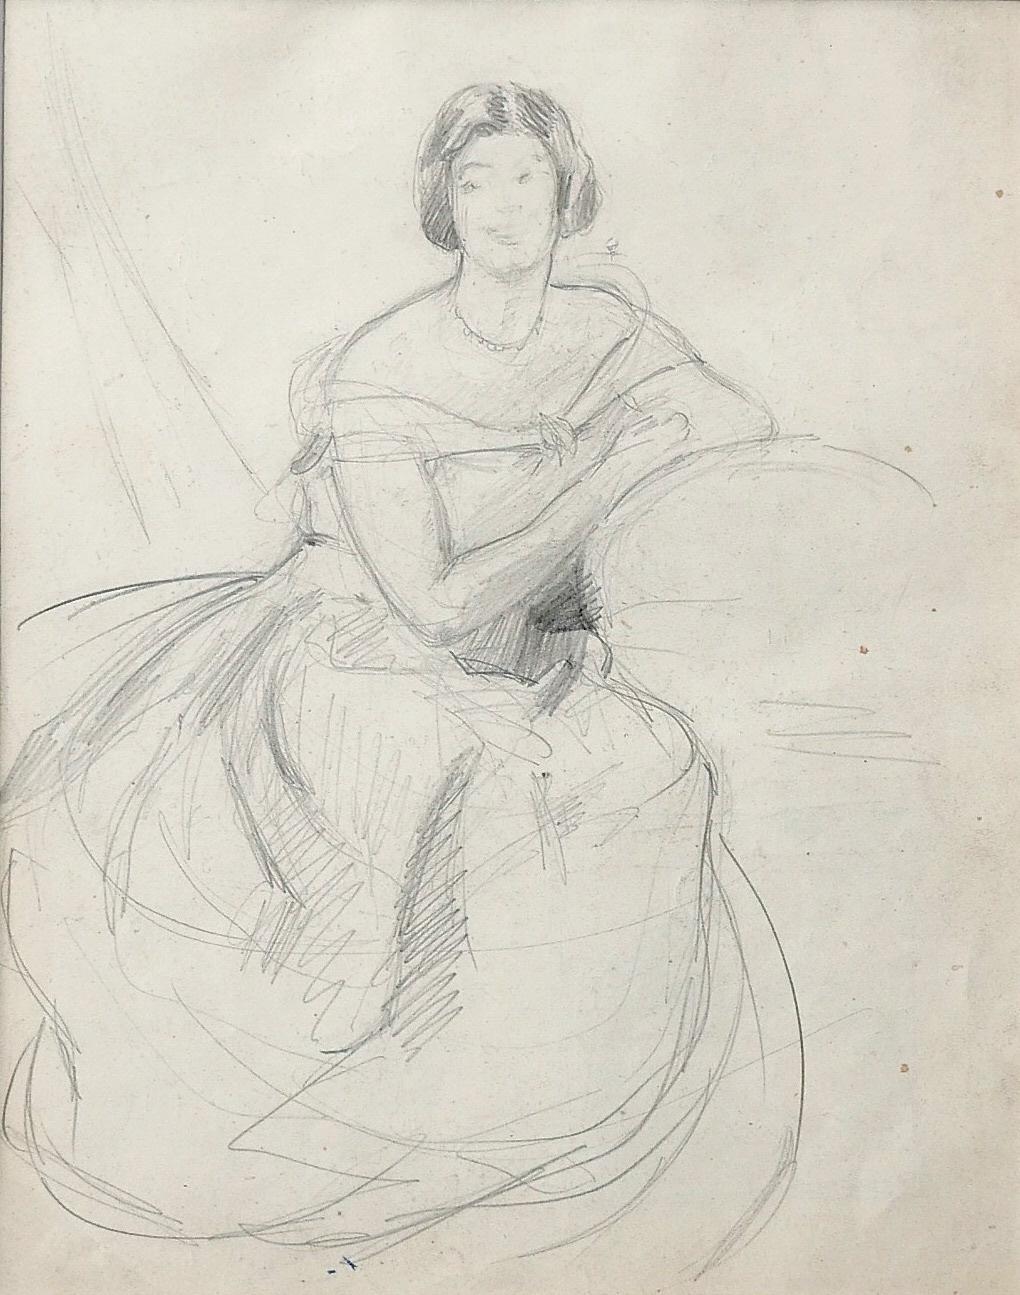 Unknown Figurative Art - Portrait of Woman - Drawing in Pencil - 20th Century